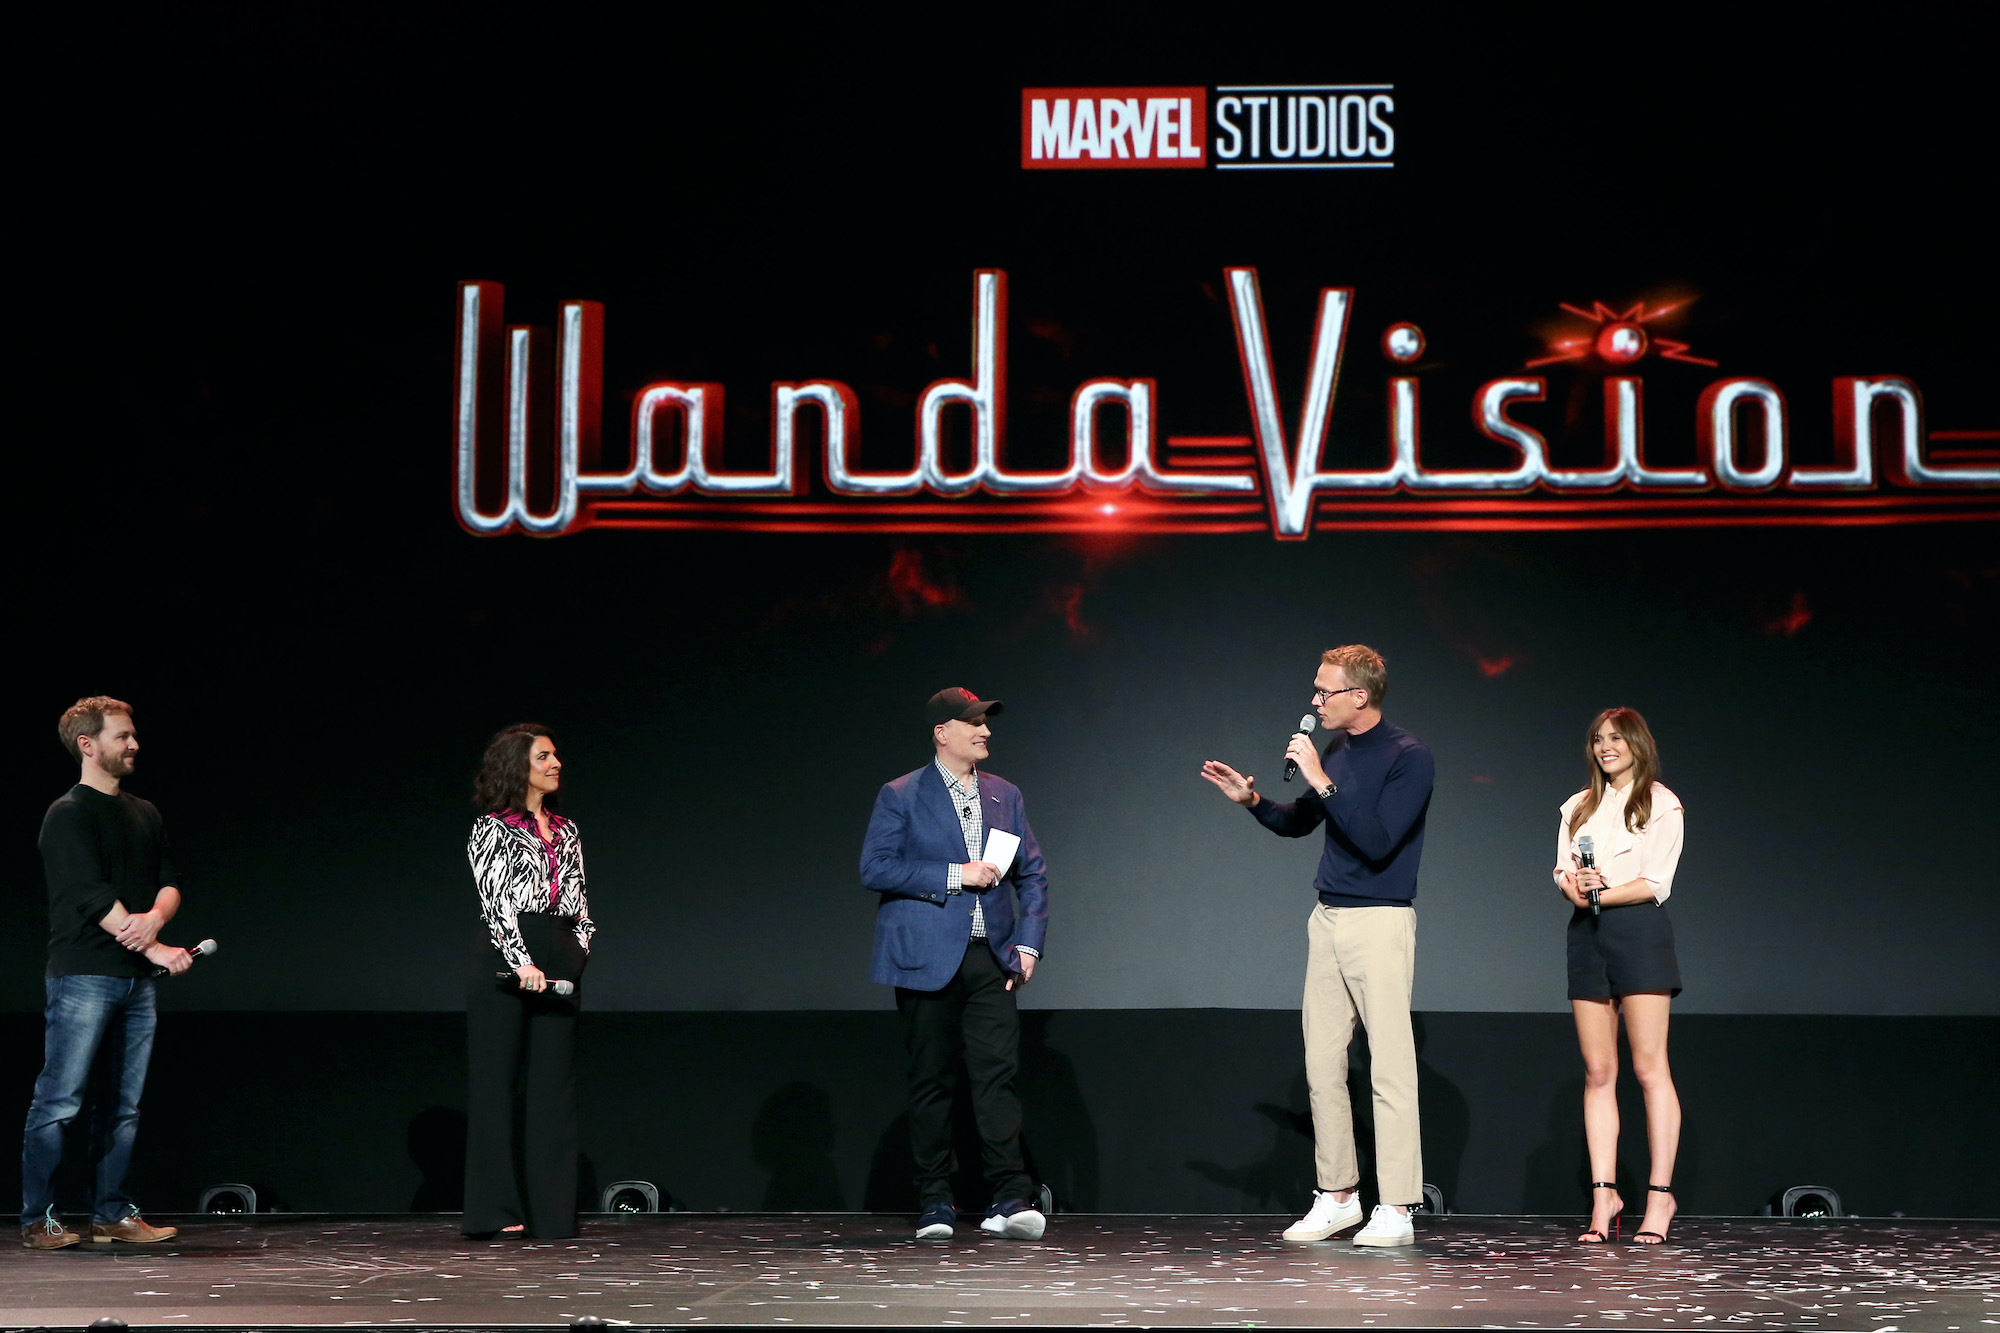 Matt Shakman and Jac Schaeffer, Kevin Feige, and Paul Bettany and Elizabeth Olsen